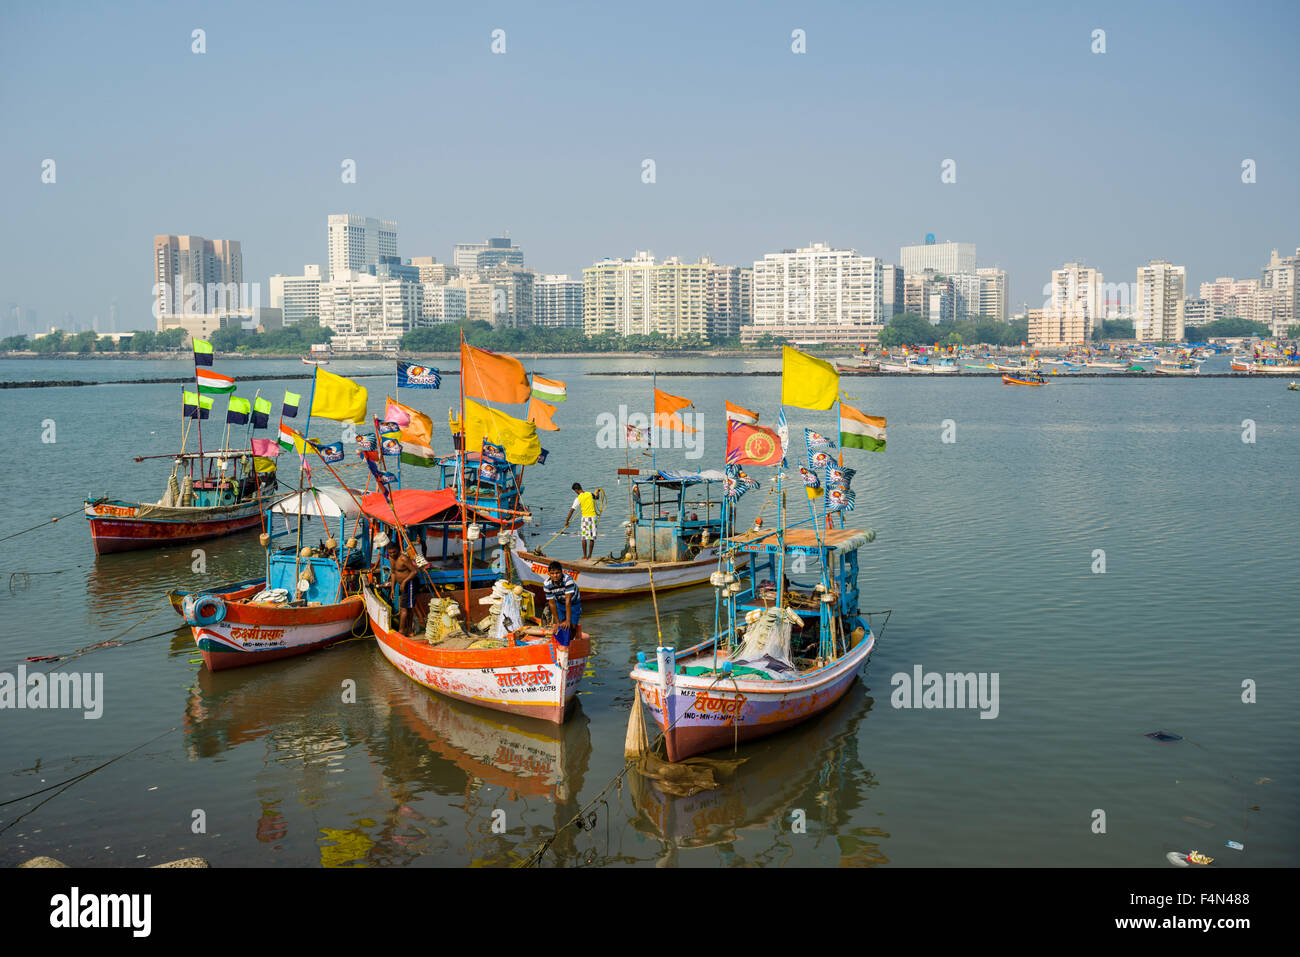 The skyline of the suburb Churchgate seen across the Back Bay with some fishing boats Stock Photo